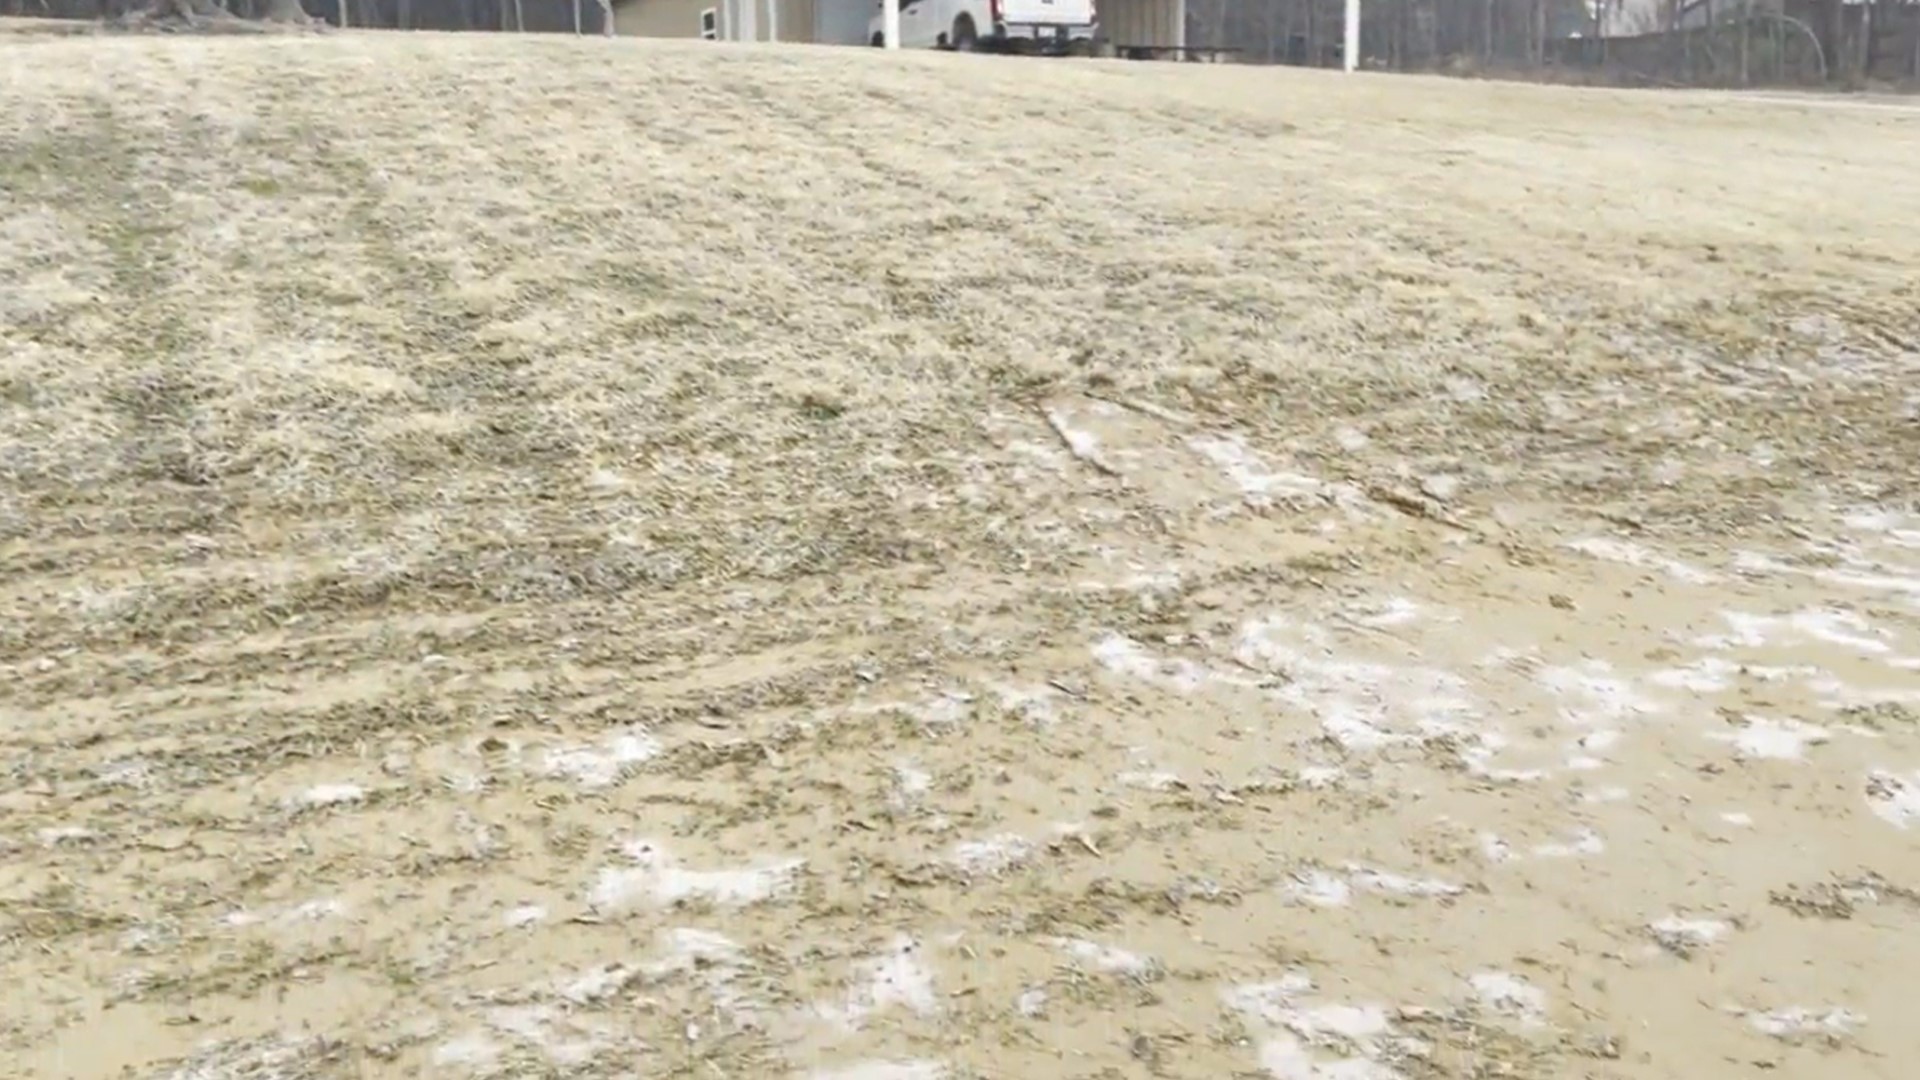 CBS19's Zach Wellerman gives us a peek at the snow accumulation in Hallsville.